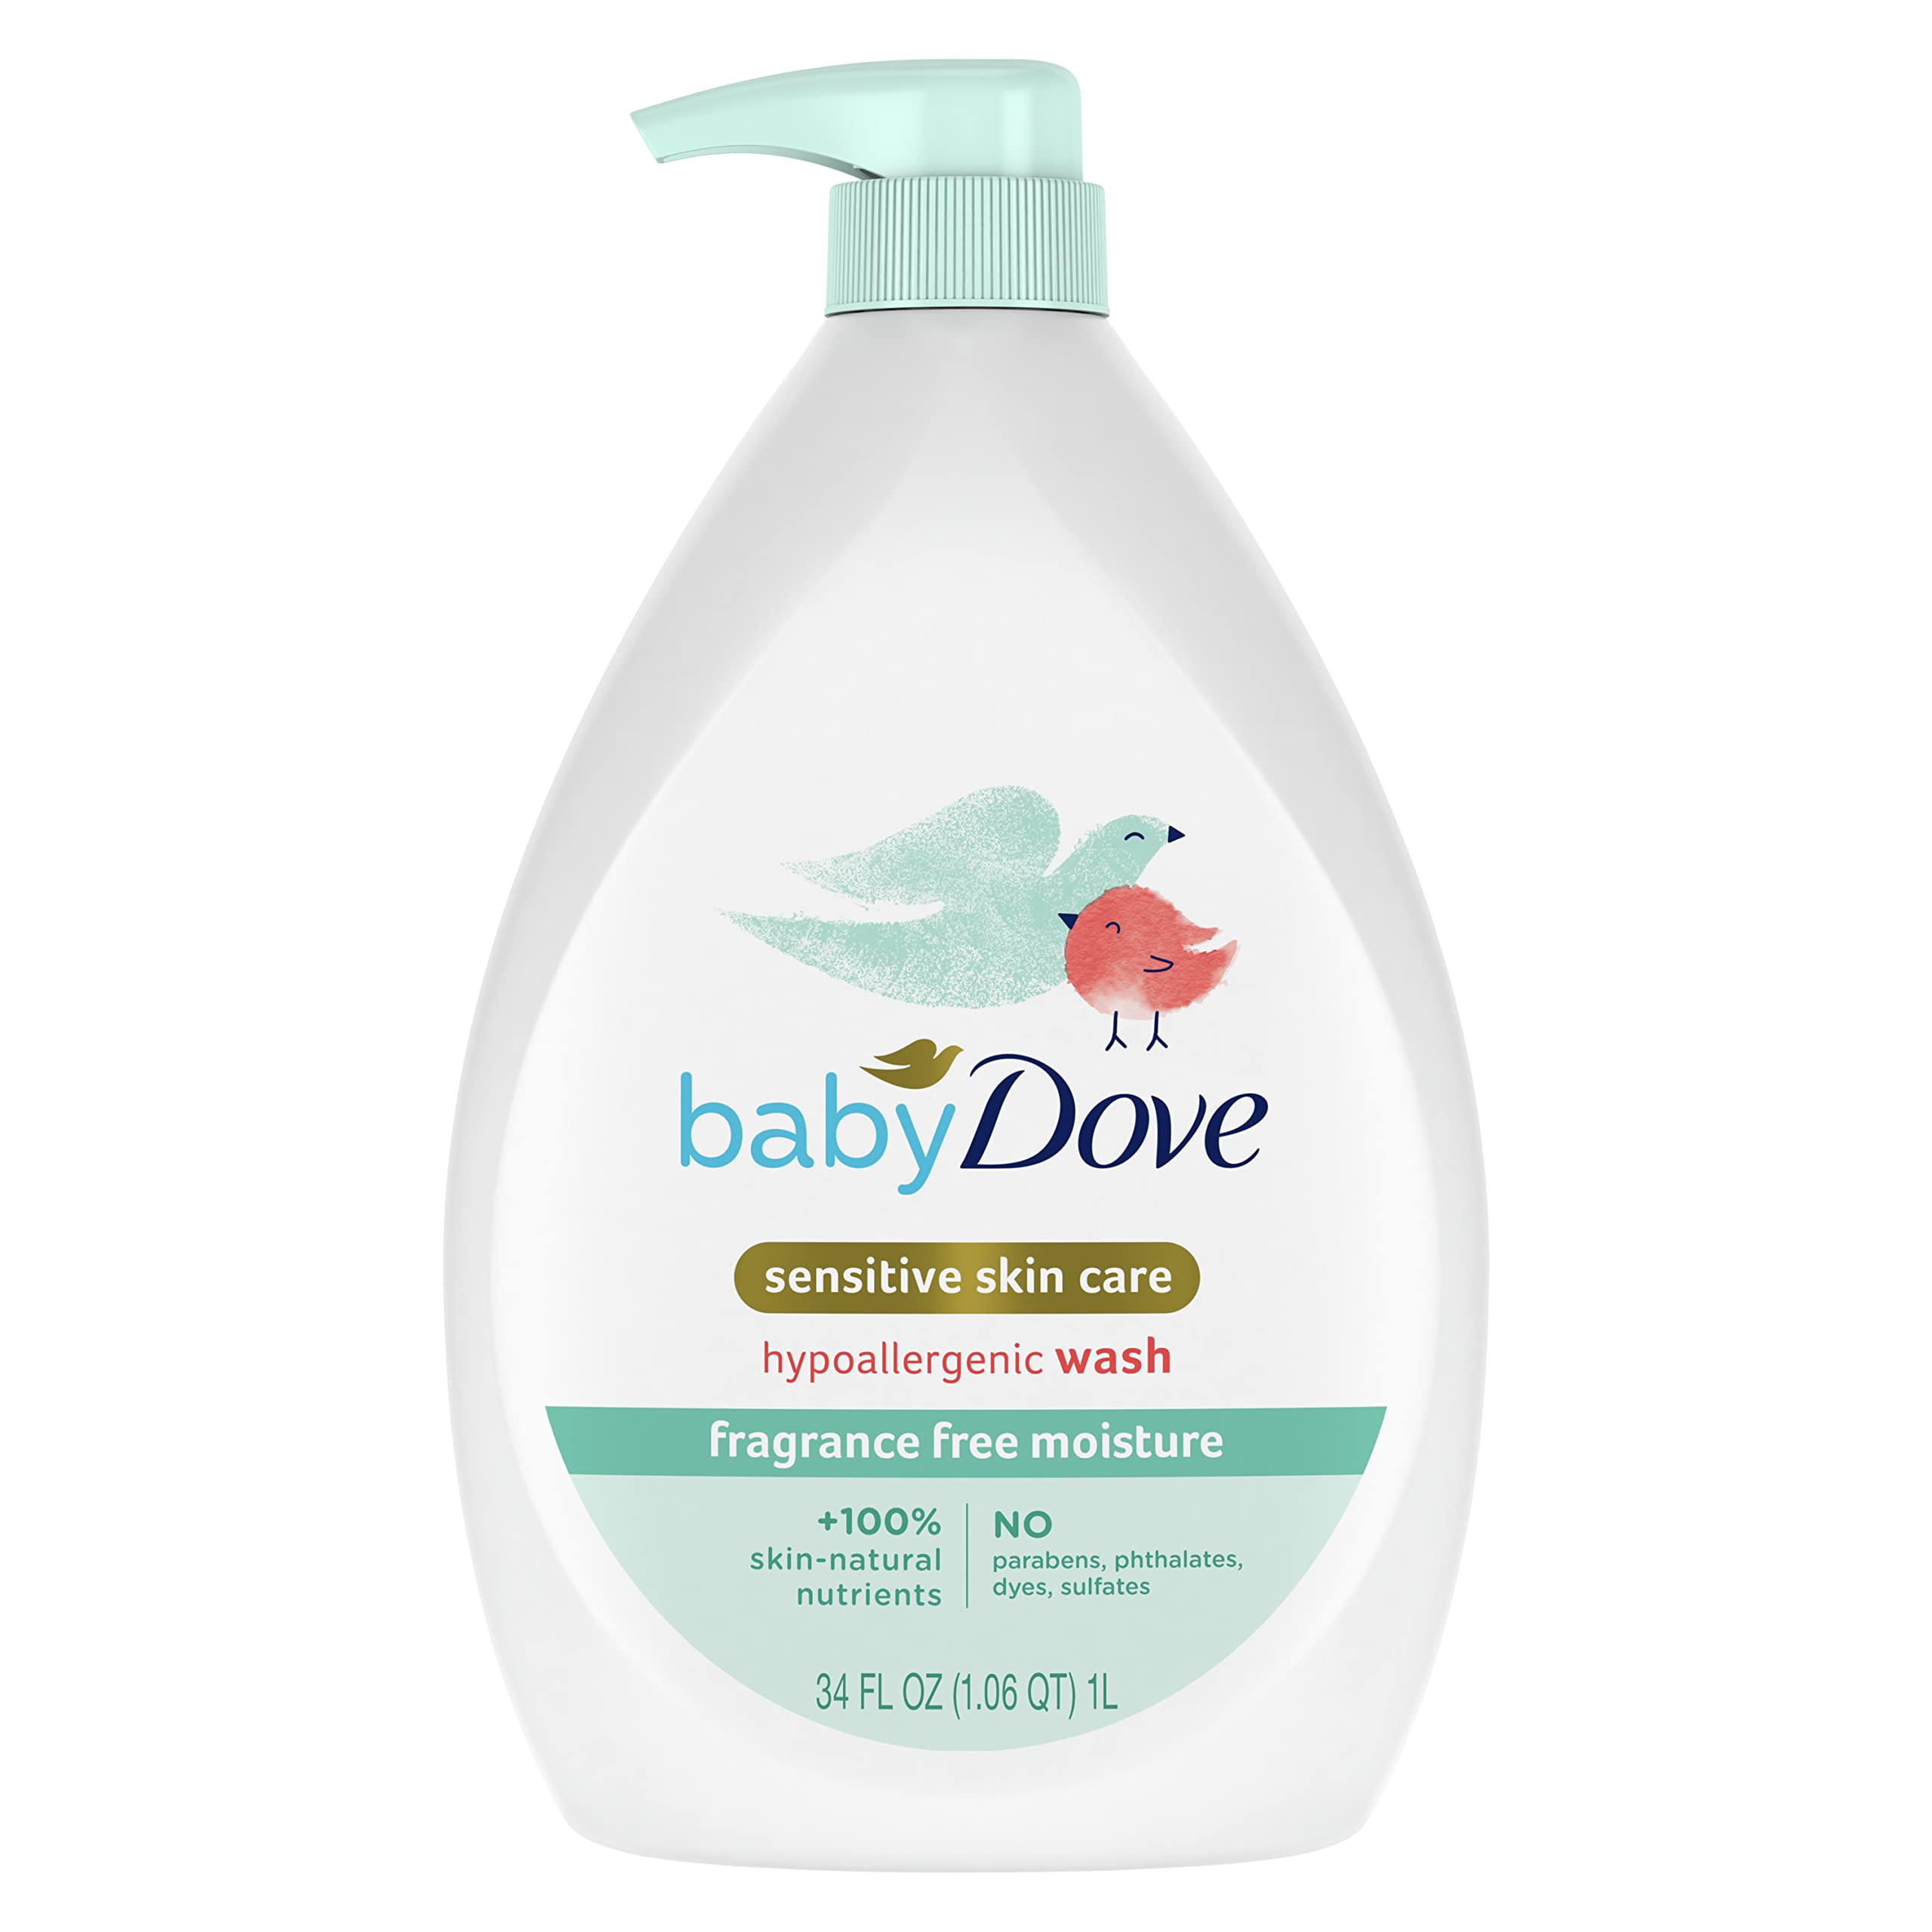 Baby Dove Sensitive Skin Care Baby Wash Fragrance Free Moisture For Baby Bath Time Fragrance Free and Hypoallergenic, Washes Away Bacteria 34 oz